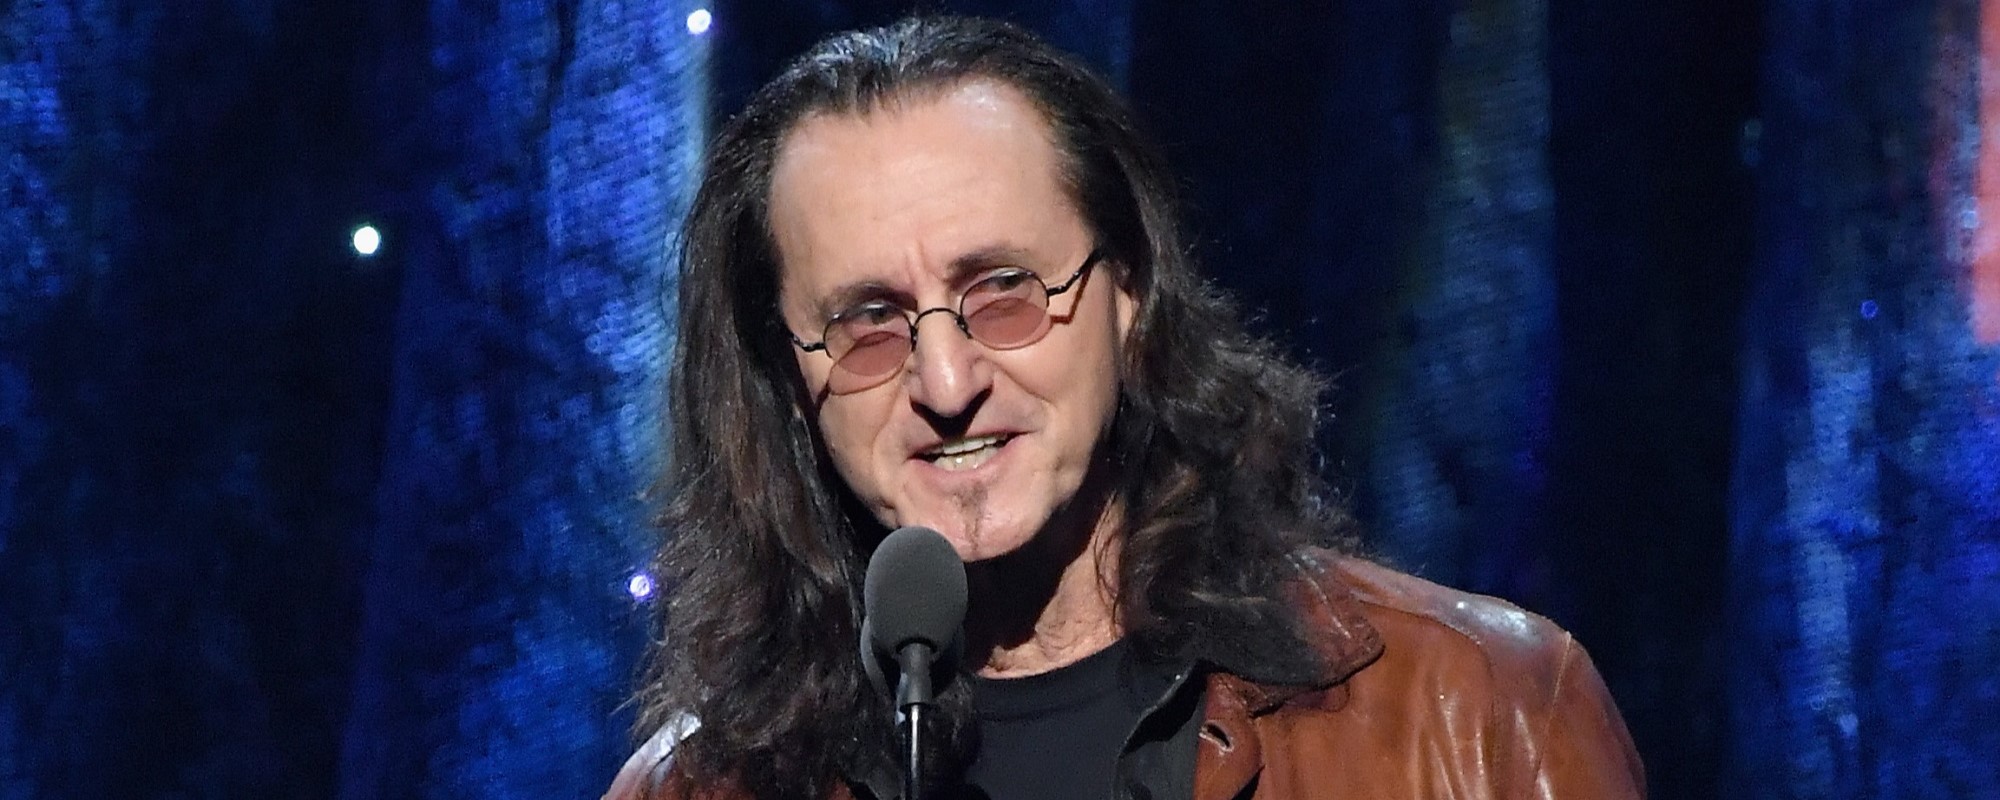 Rush’s Geddy Lee Reveals He Received Slew of “Inappropriate” Messages Following Death of Bandmate Neil Peart